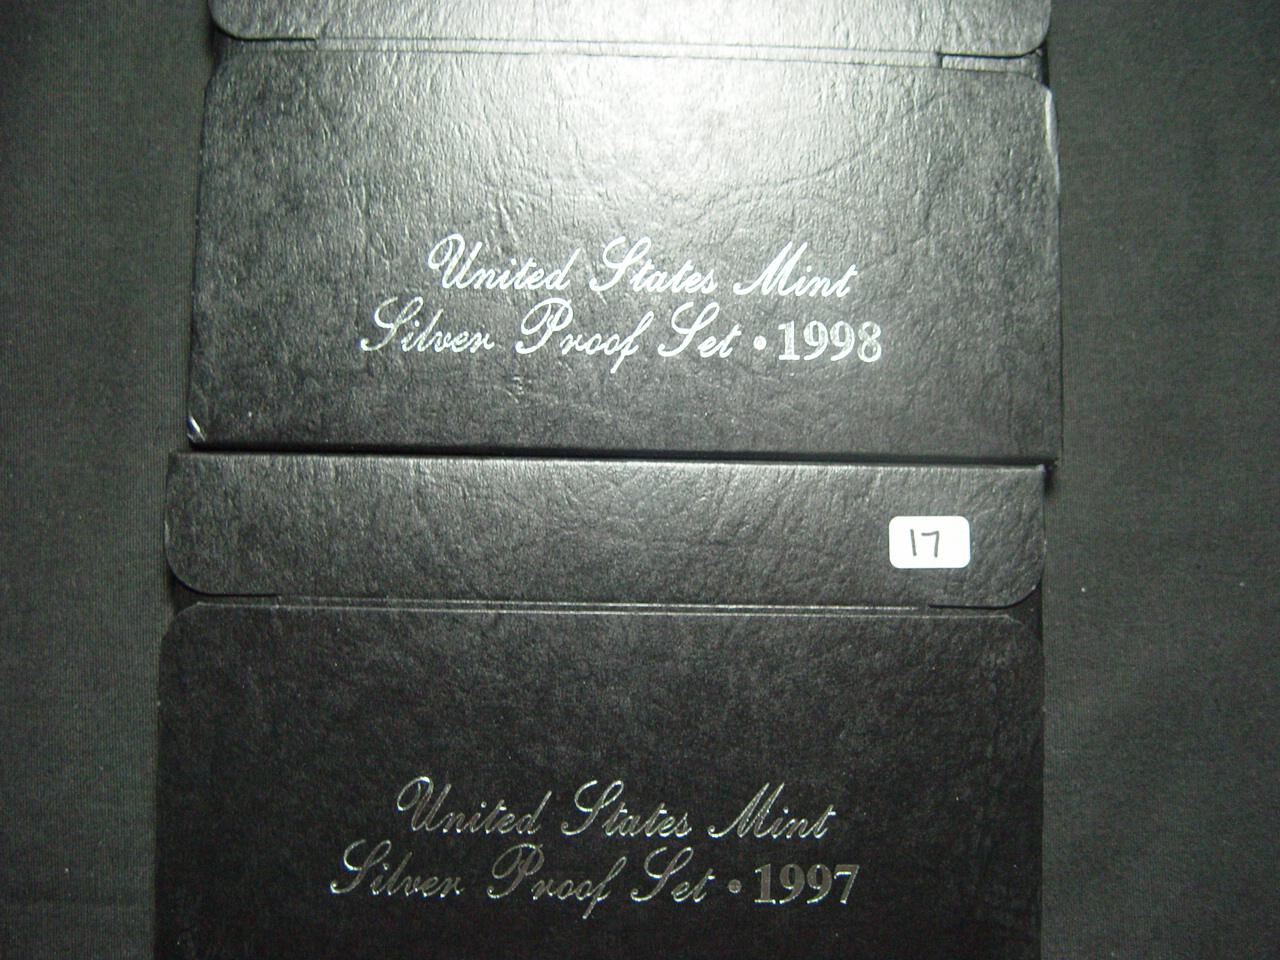 Pair of Silver Proof Sets: 1997 & 1998